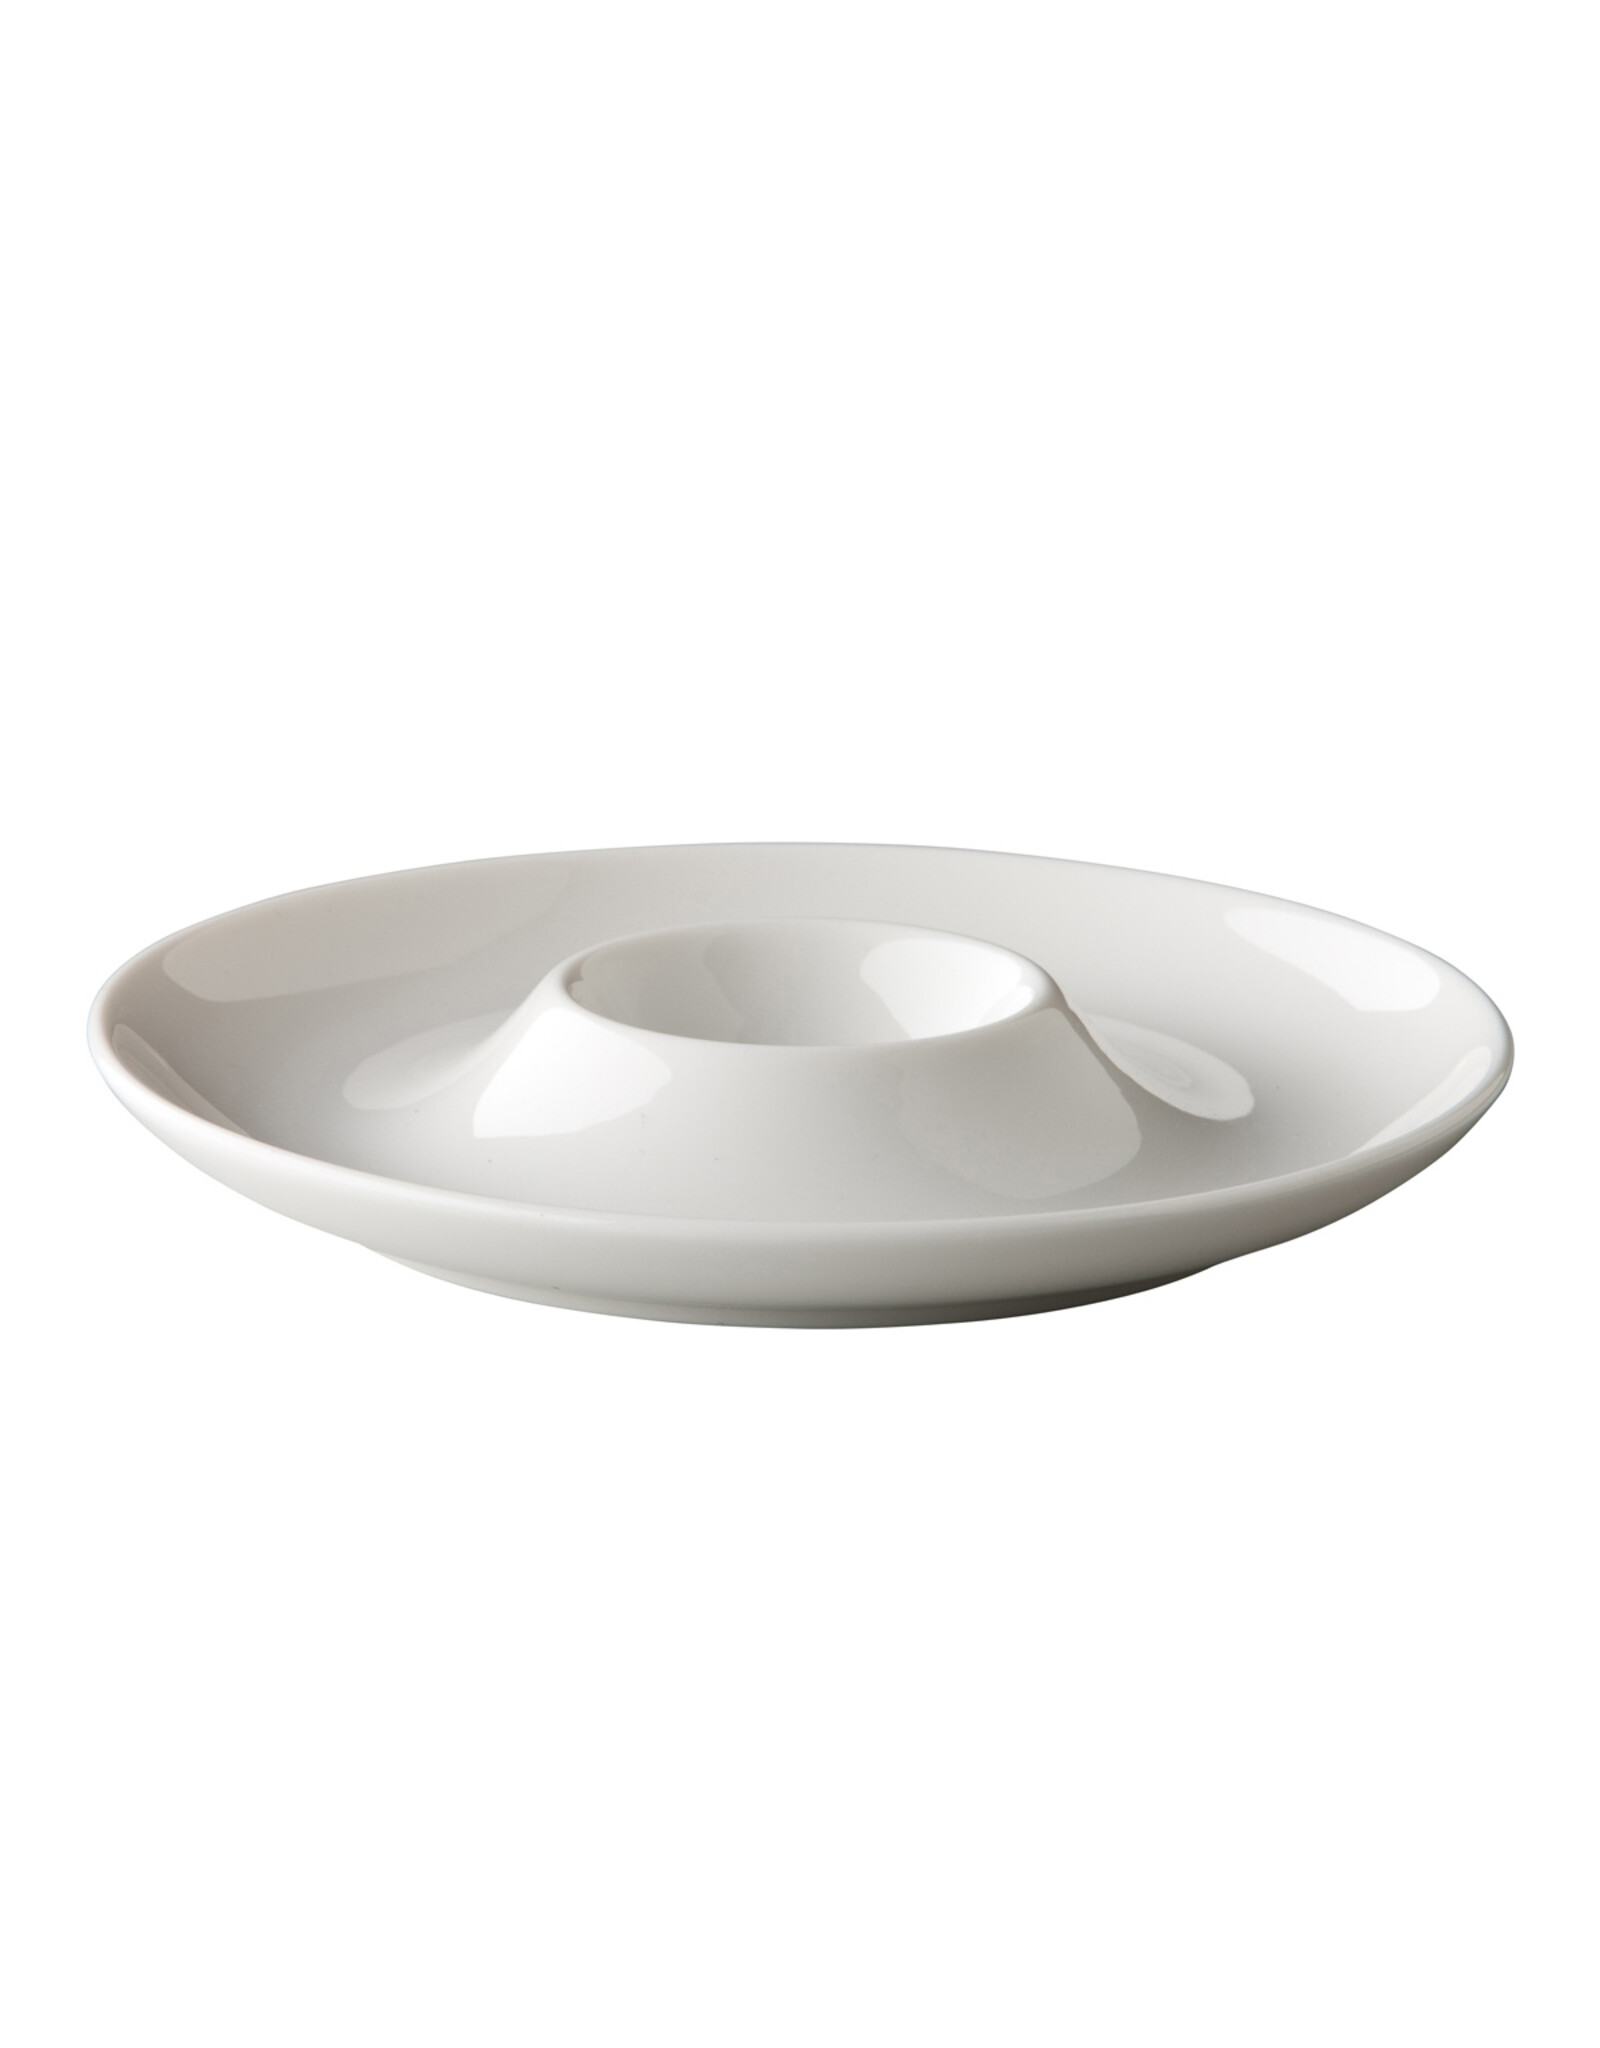 Stylepoint Egg cup saucer 13 cm